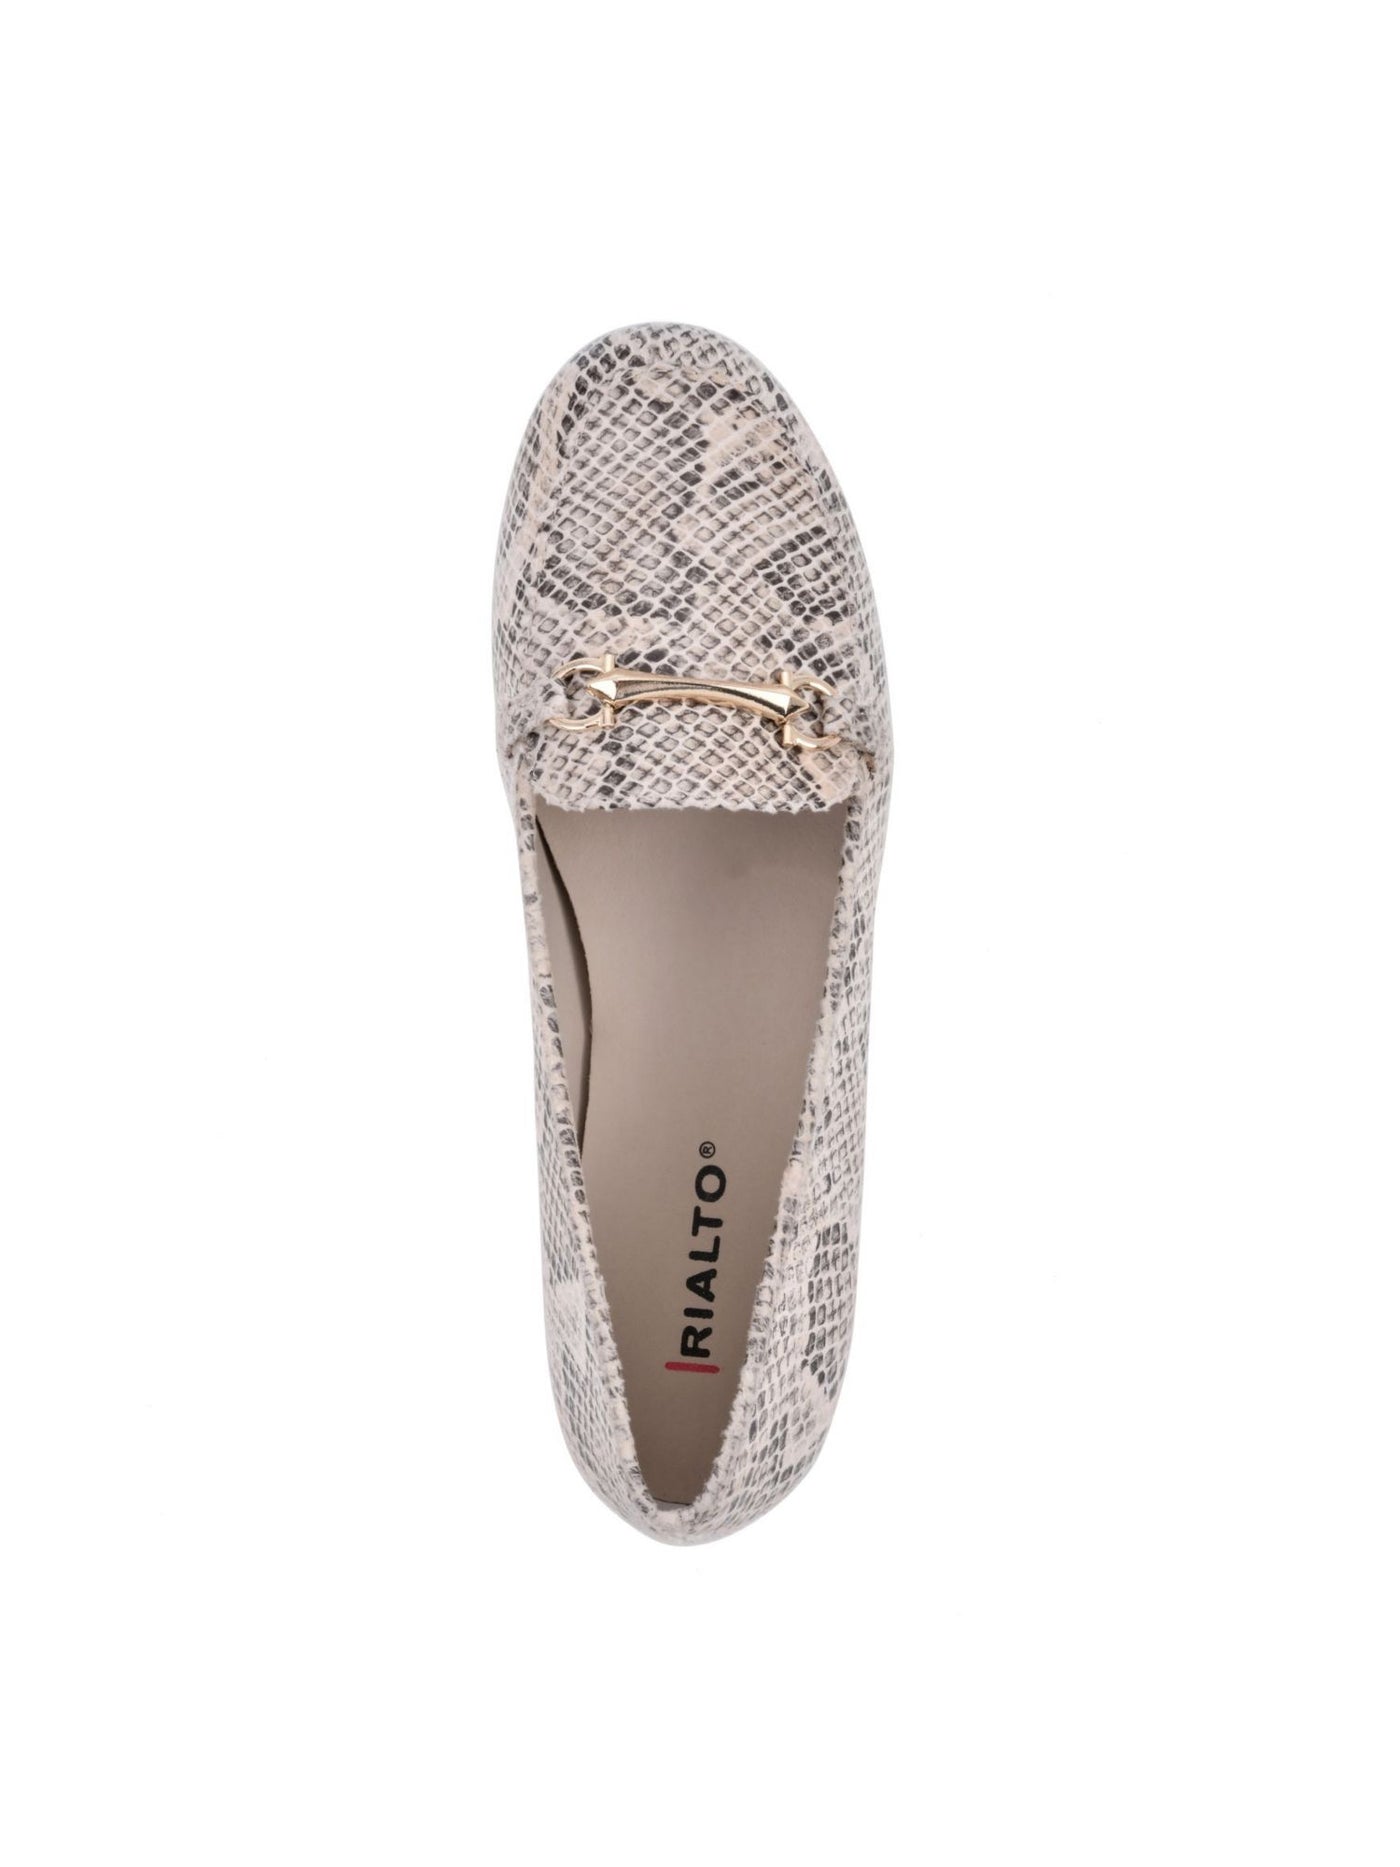 RIALTO Womens Beige Snake Print Metallic Bit Comfort Padded Treaded Guiding Round Toe Slip On Loafers Shoes 9 W